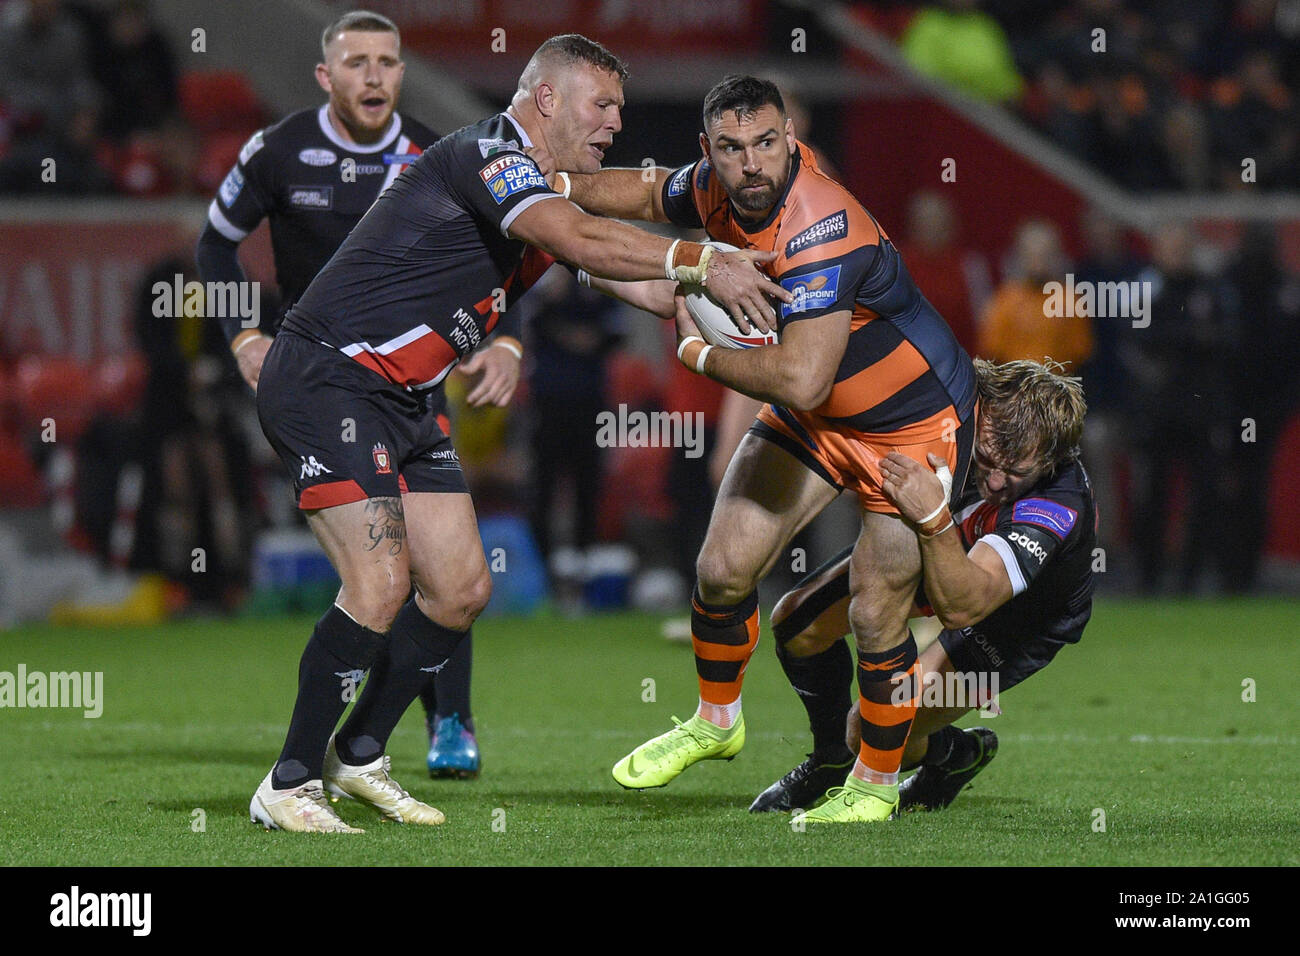 26th September 2019 ,  AJ Bell Stadium, Salford, England;  Betfred Super League Rugby, Round Eliminator 2, Salford Red Devils vs Castleford Tigers ; Castleford Tigers Matt Cook finds no way past the Salford Red Devils defence. Credit: Dean Williams/News Images Stock Photo